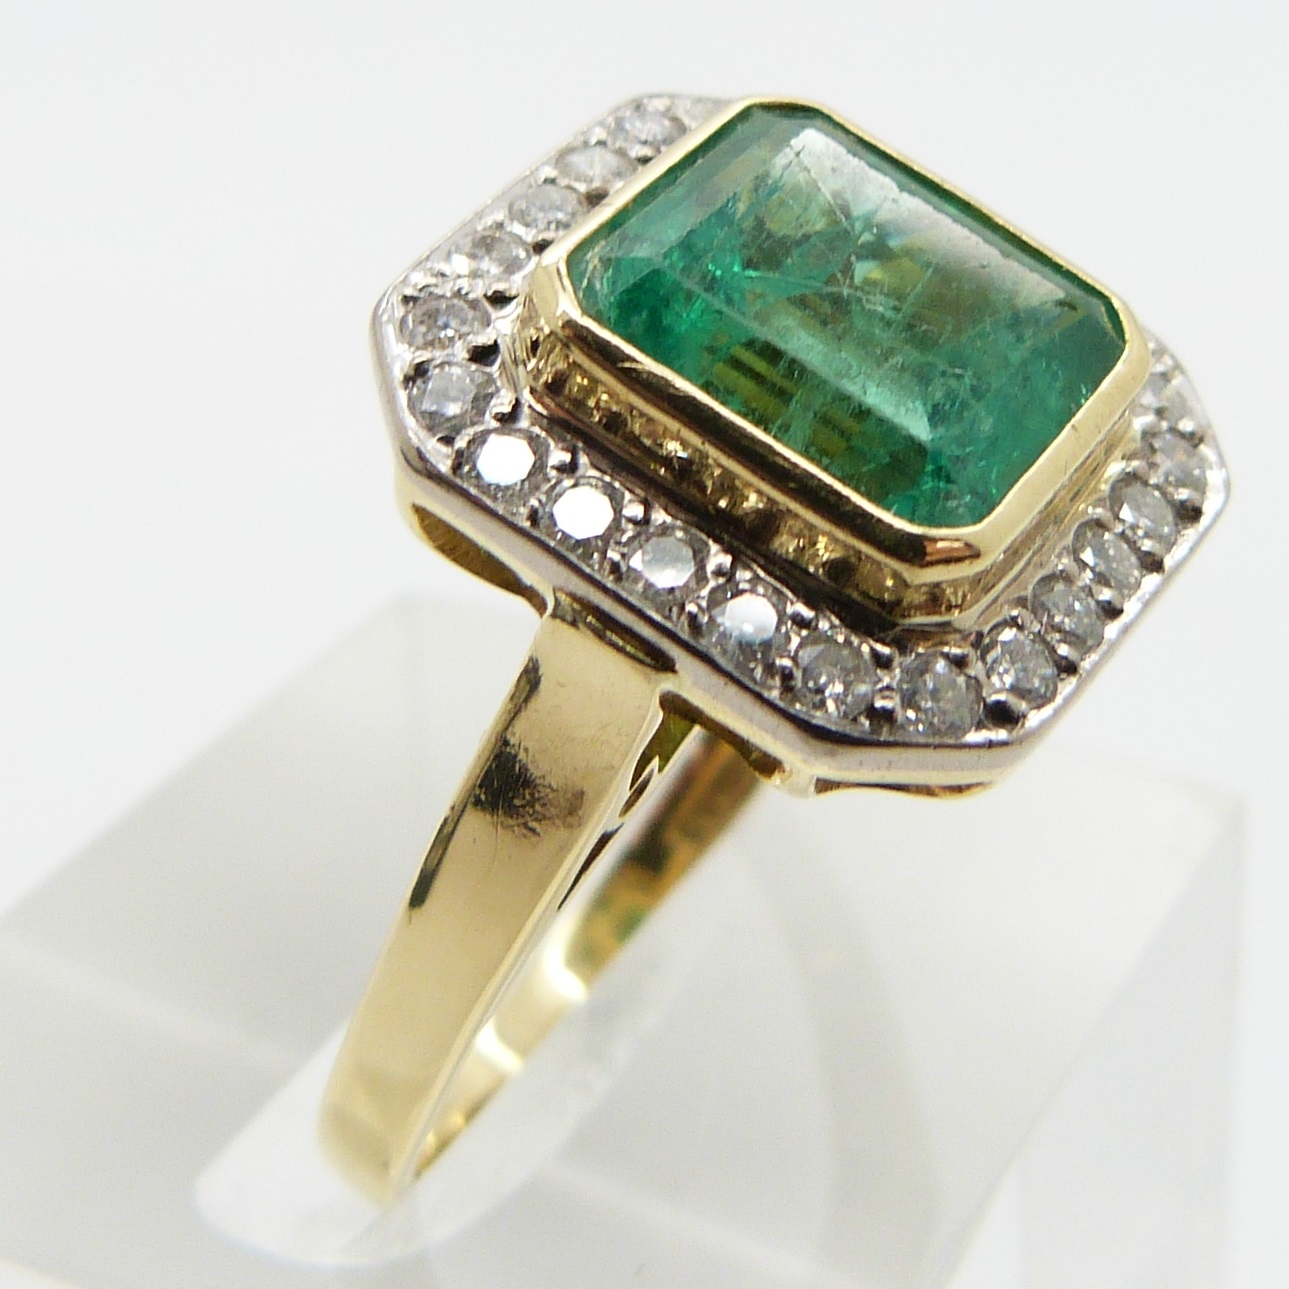 An 18ct gold ring set with an emerald cut emerald approximately 3.3ct surround by diamonds, size N - Image 3 of 3